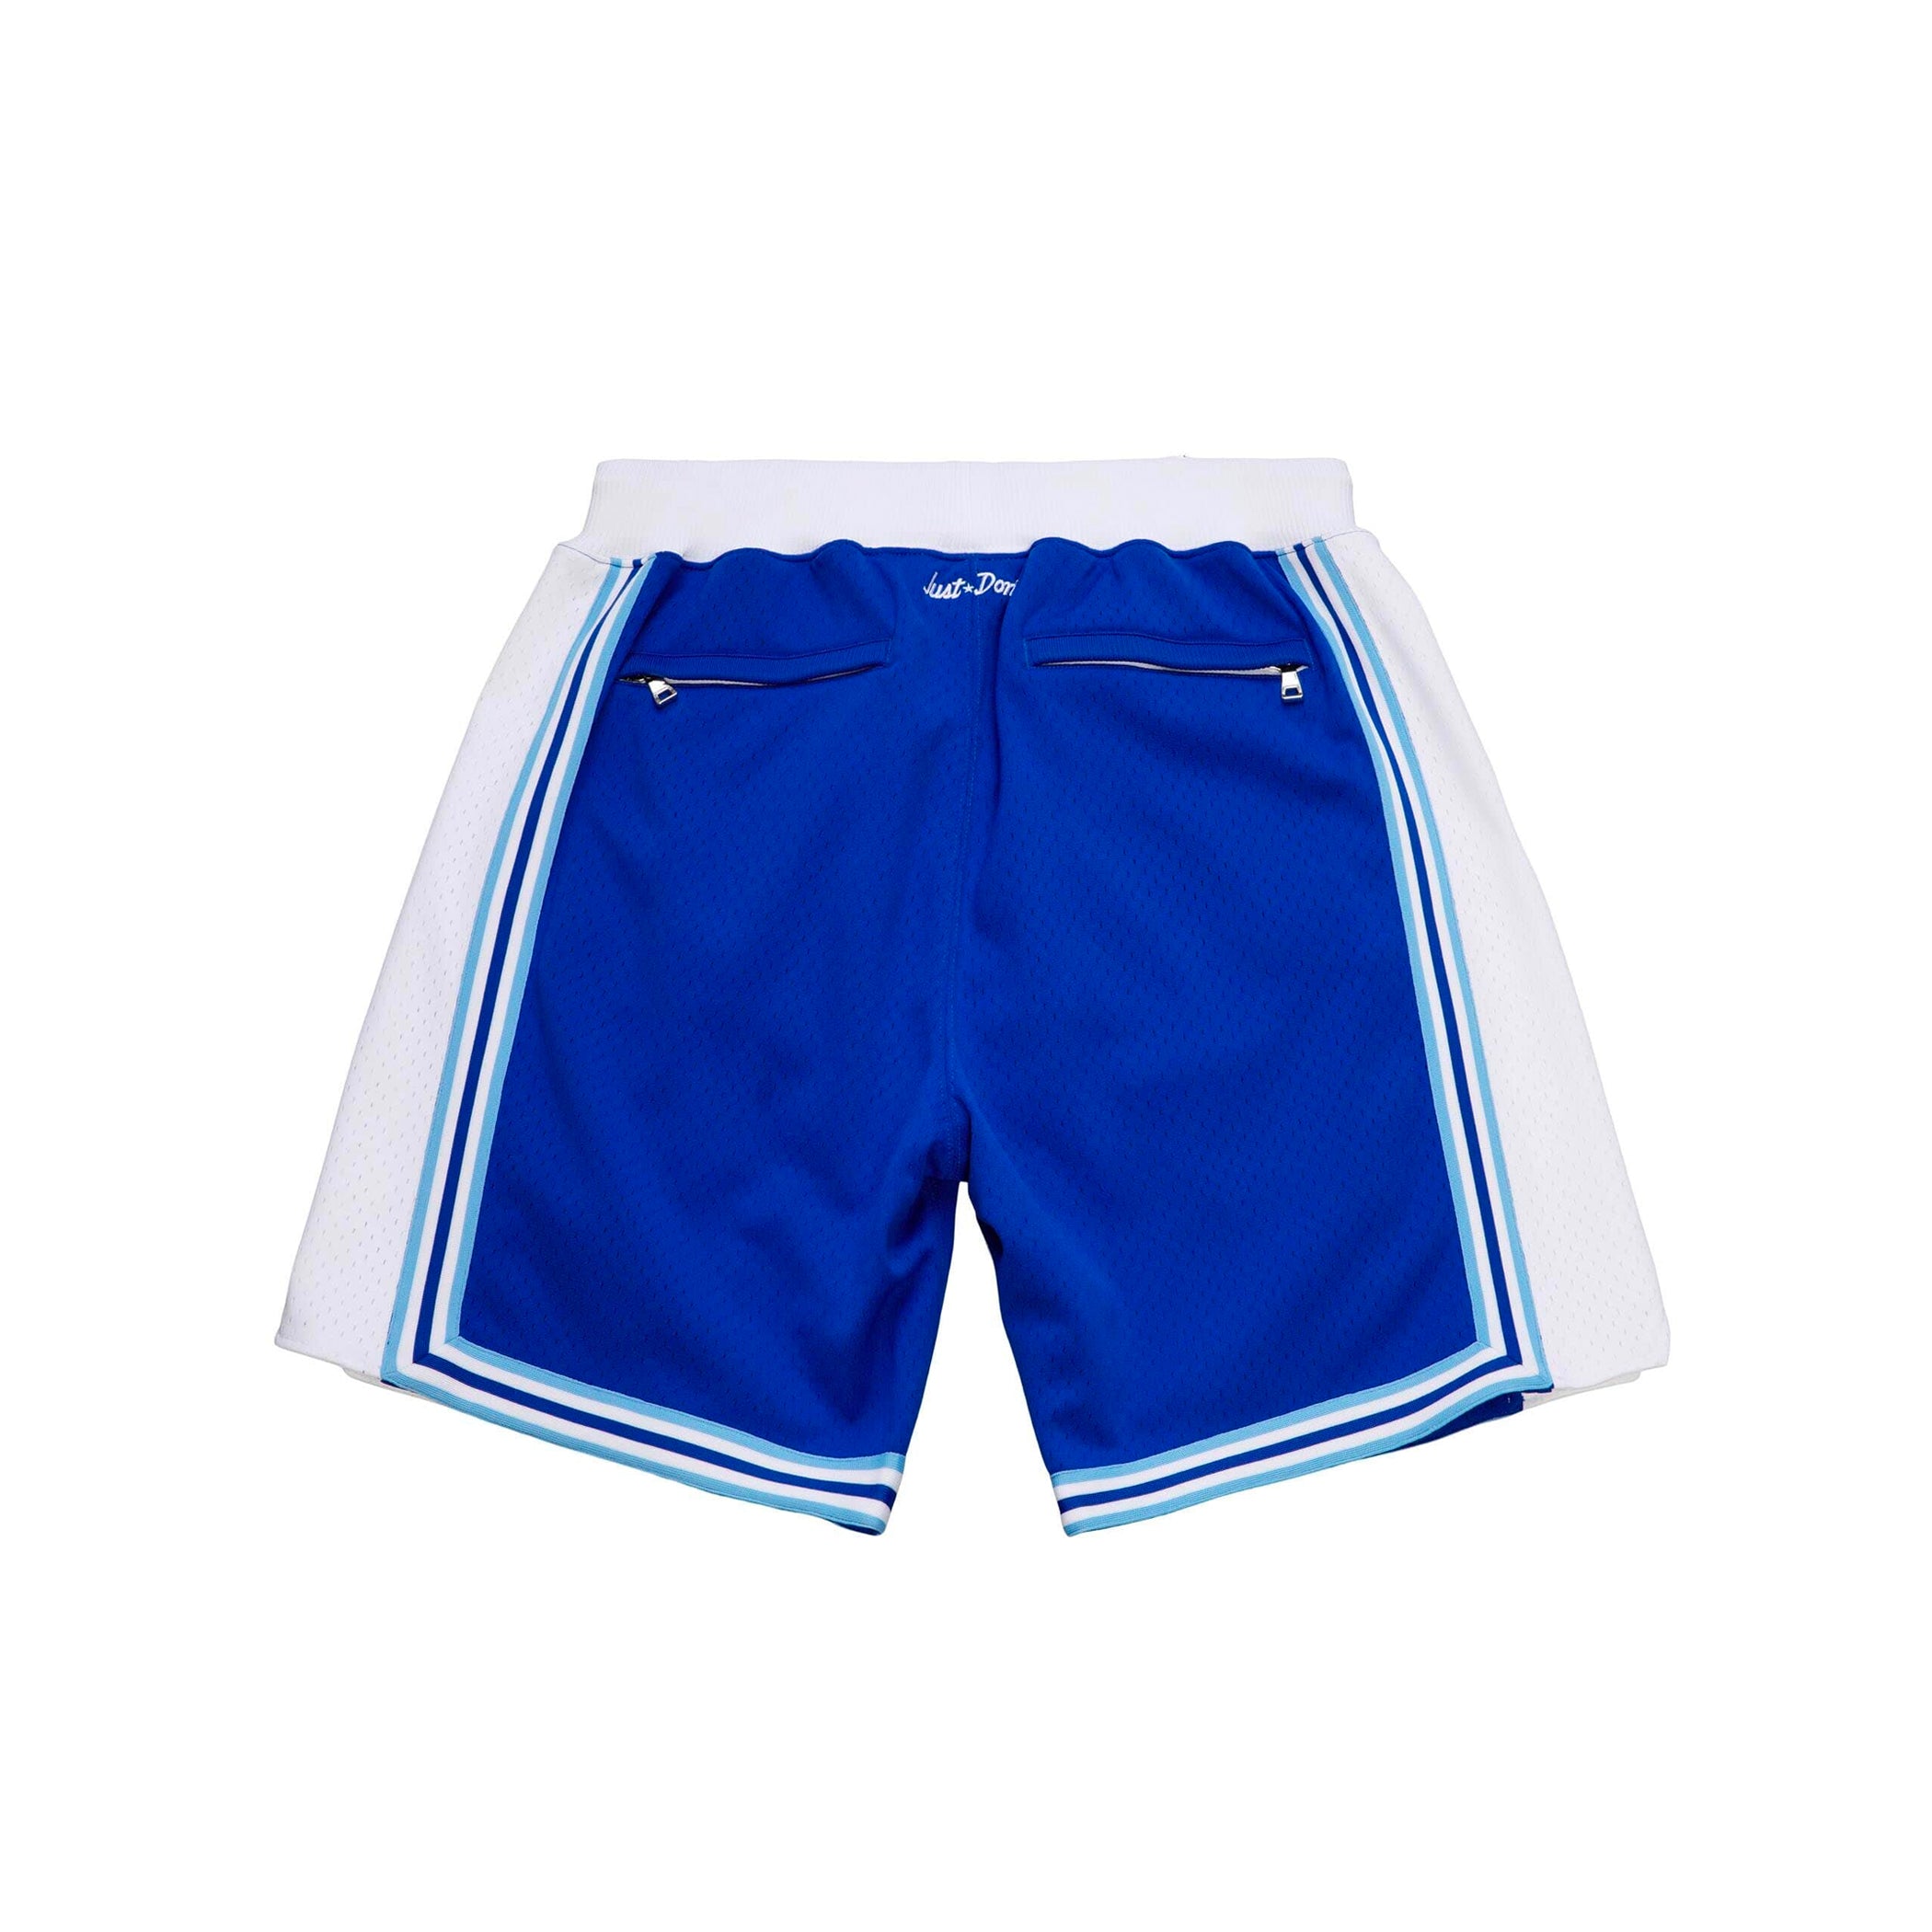 MITCHELL & NESS - Men - 96 Los Angeles Lakers Authentic Shorts